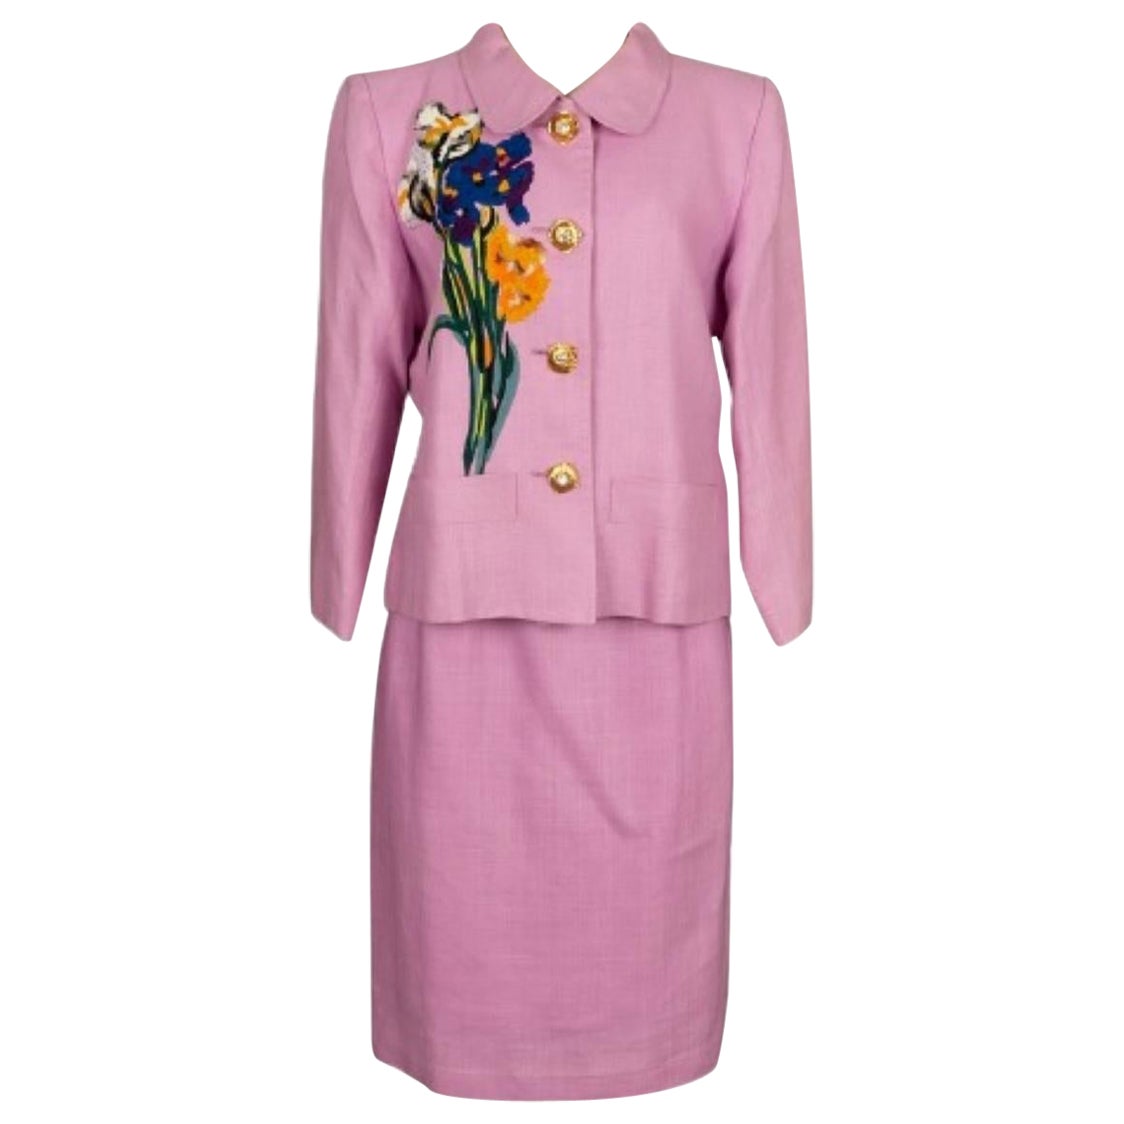 Christian Lacroix Jacket and Skirt in Mauve Suit For Sale